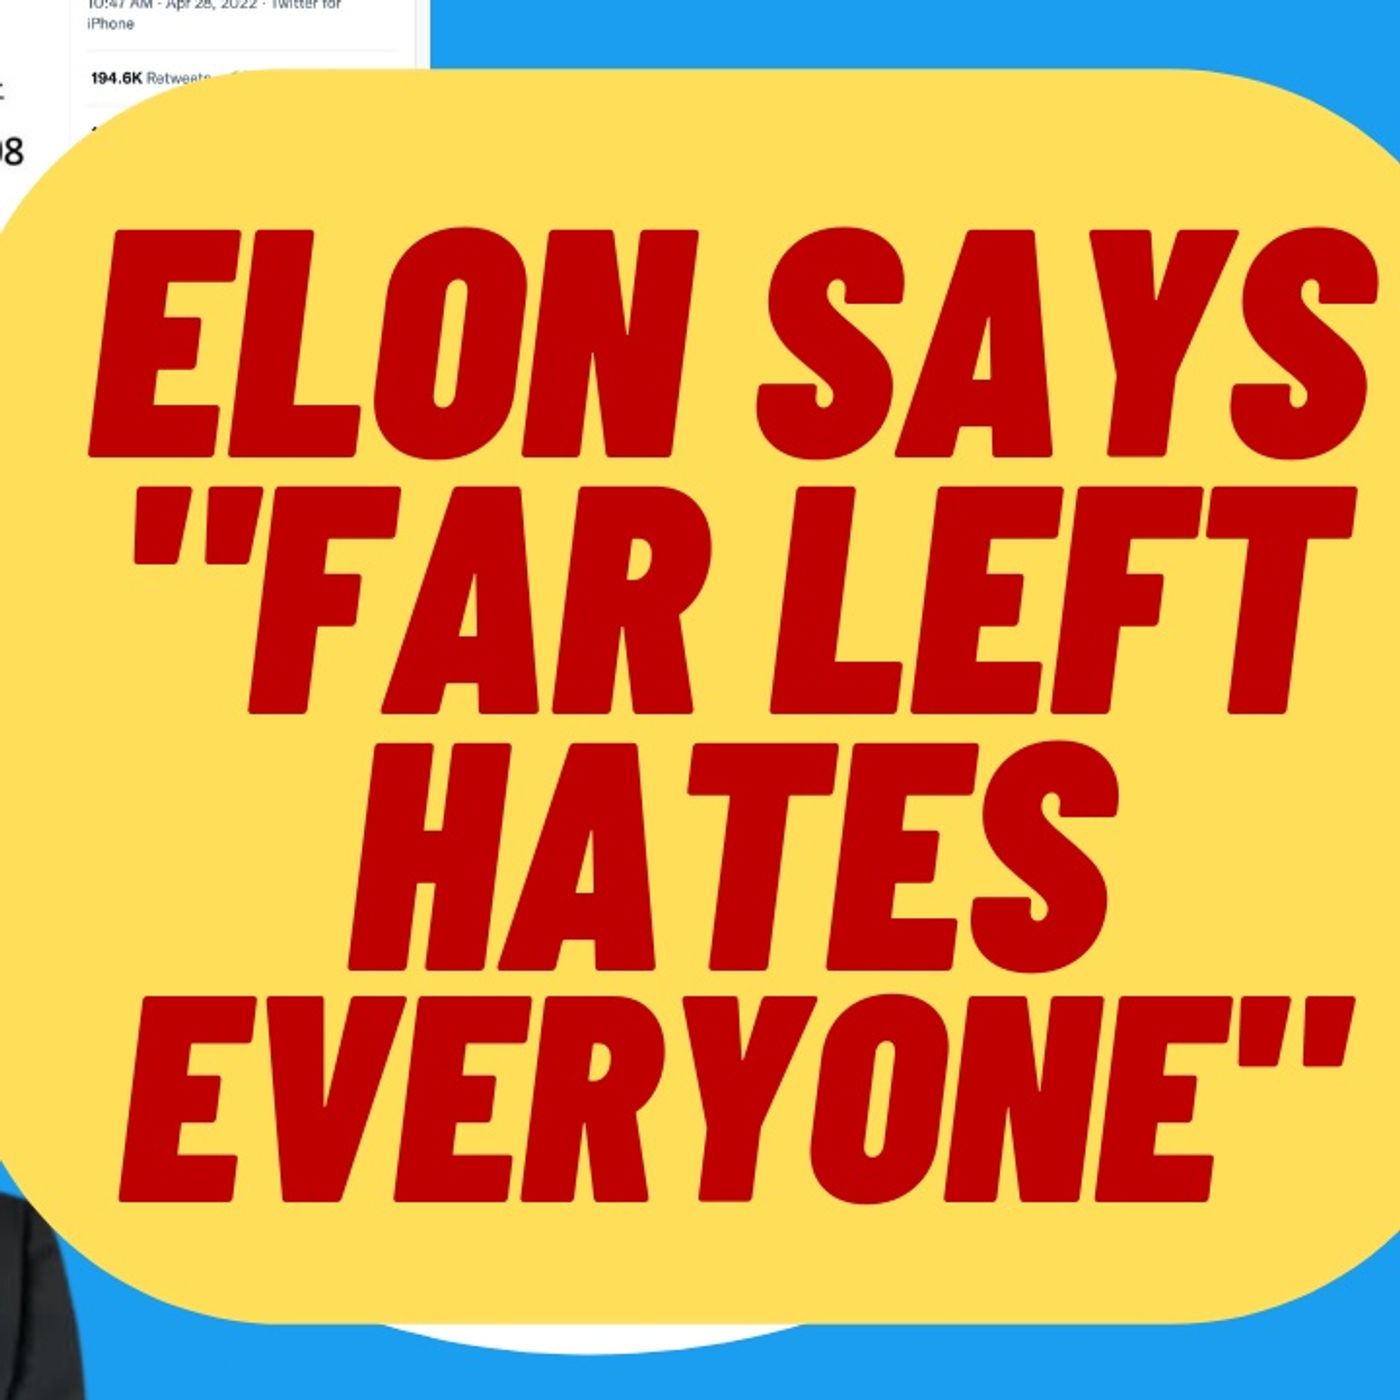 Elon Musk Tweets Meme, "The Far Left Hates Everyone, Themselves Included"